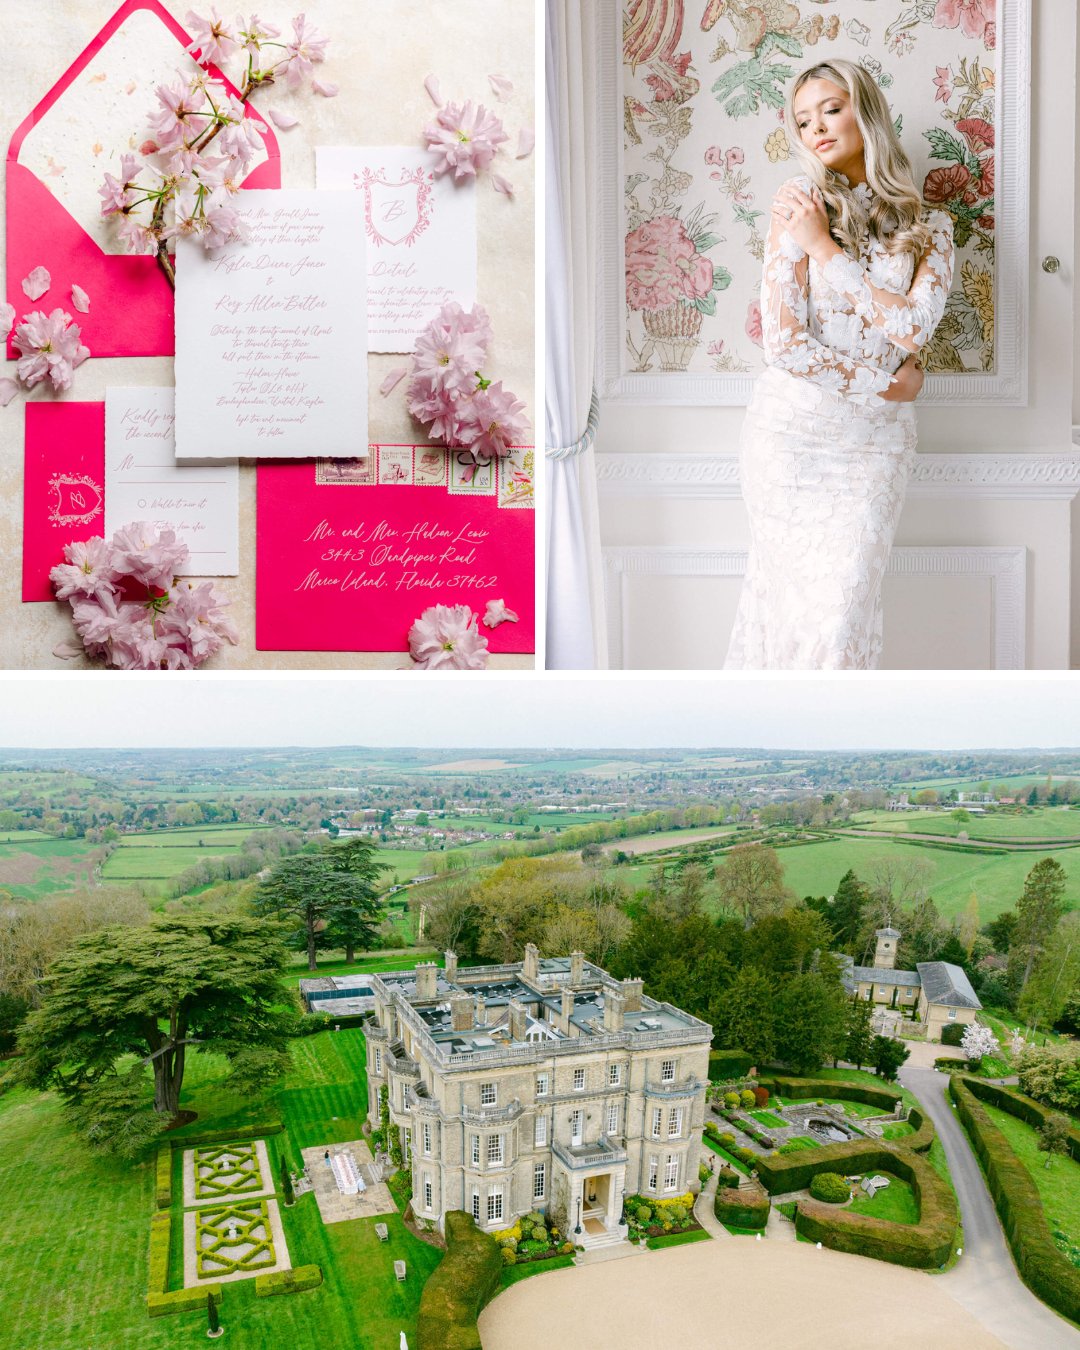 Collage of wedding invitation, a bride in a gown and historic manor in England.